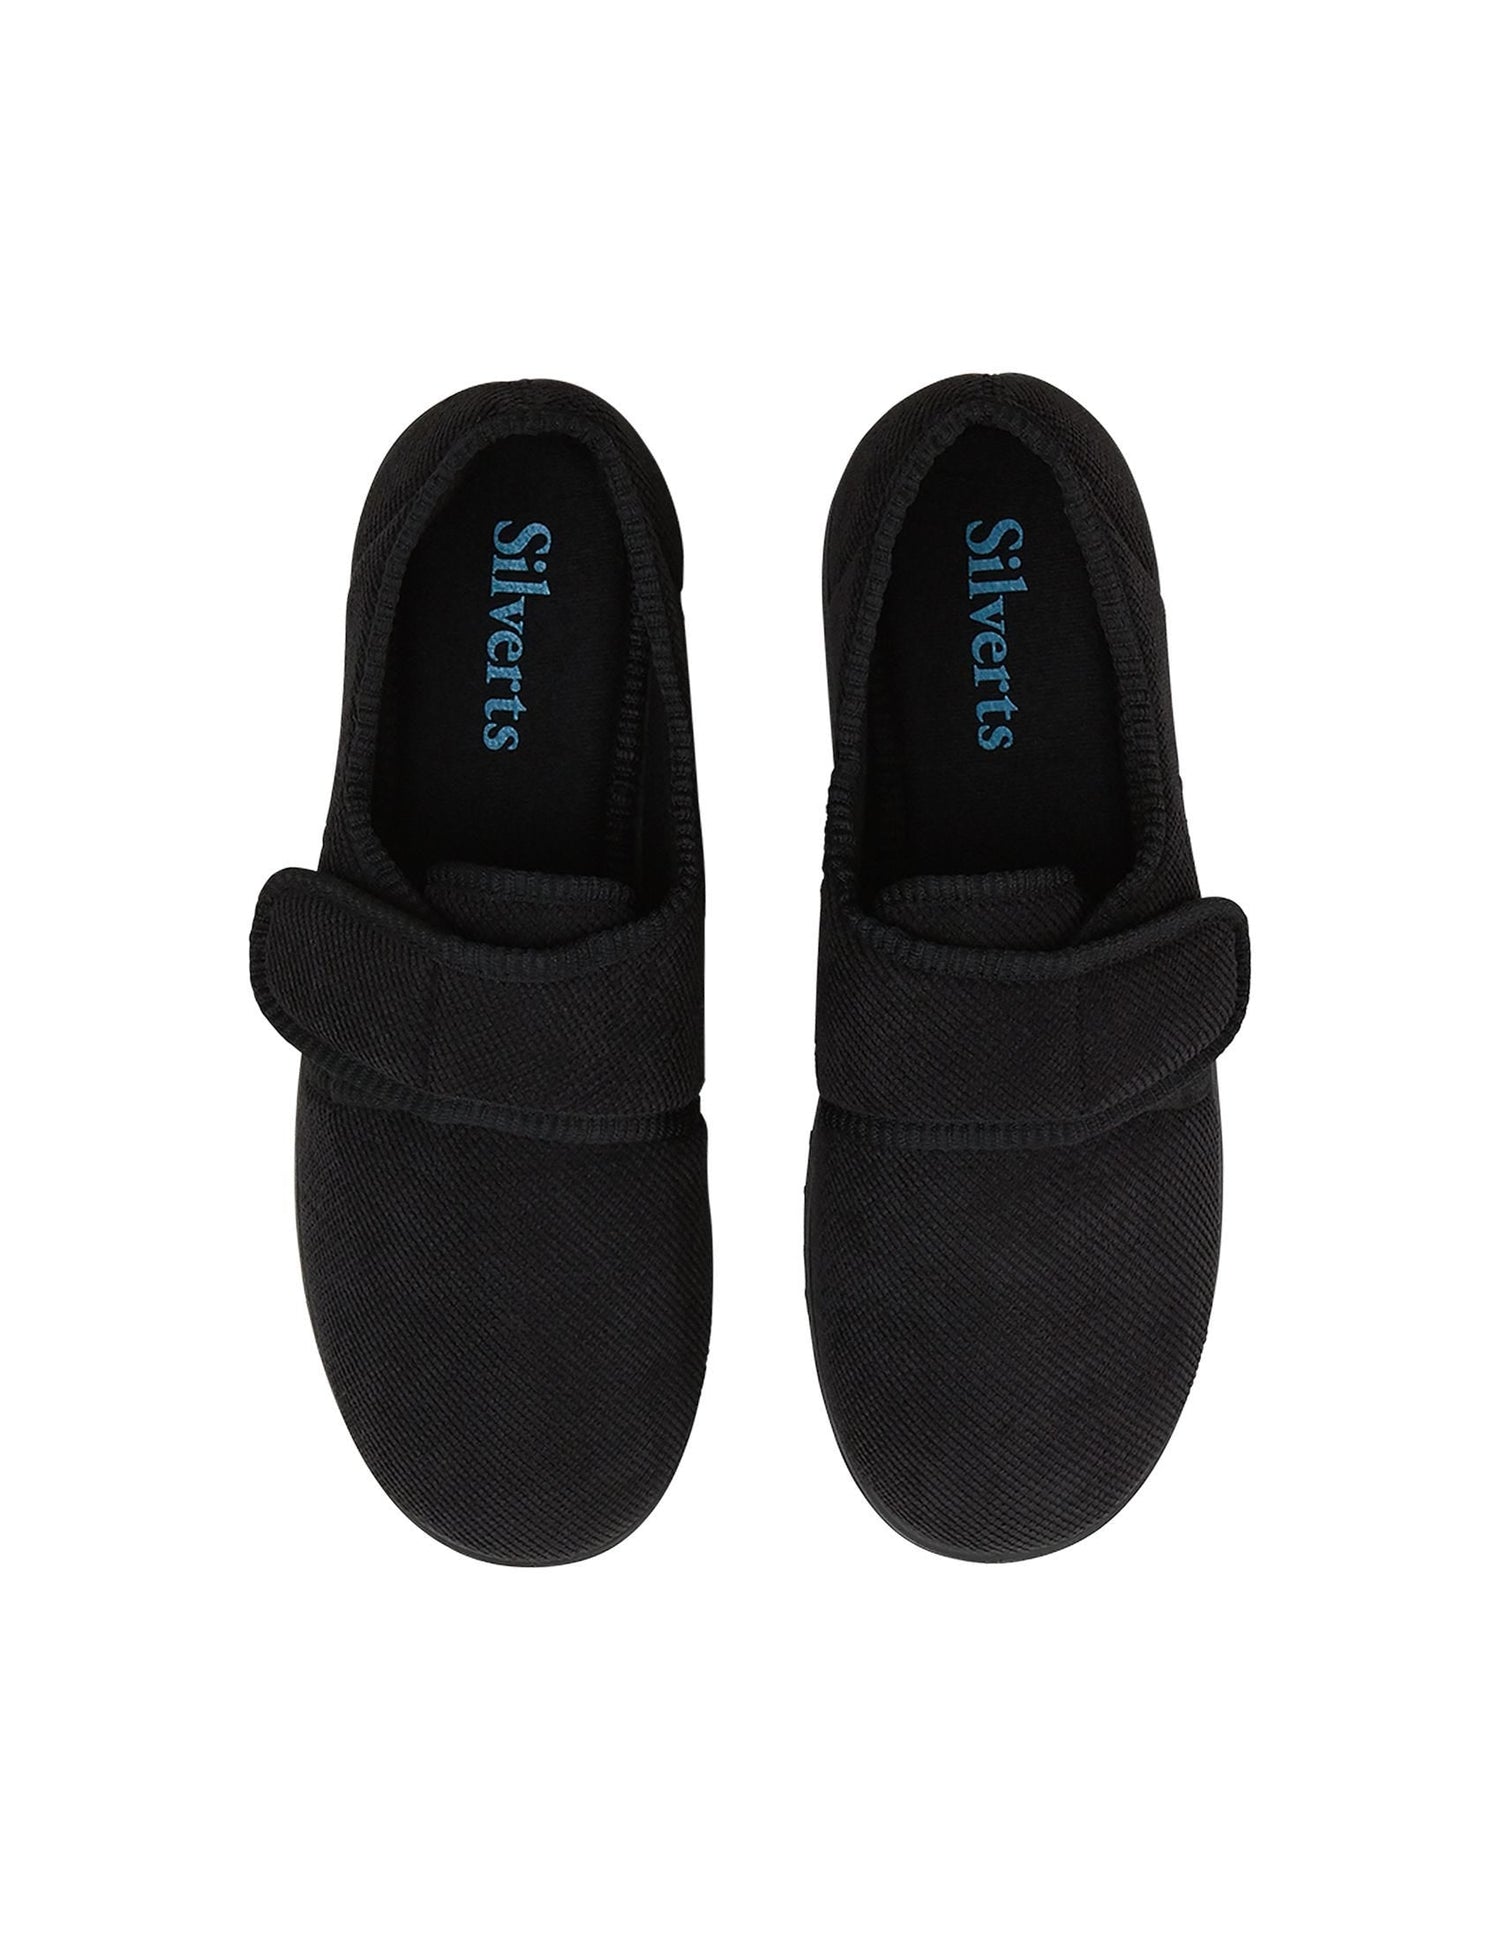 Top of wide black indoor slippers with Velcro closures and removable memory foam insoles